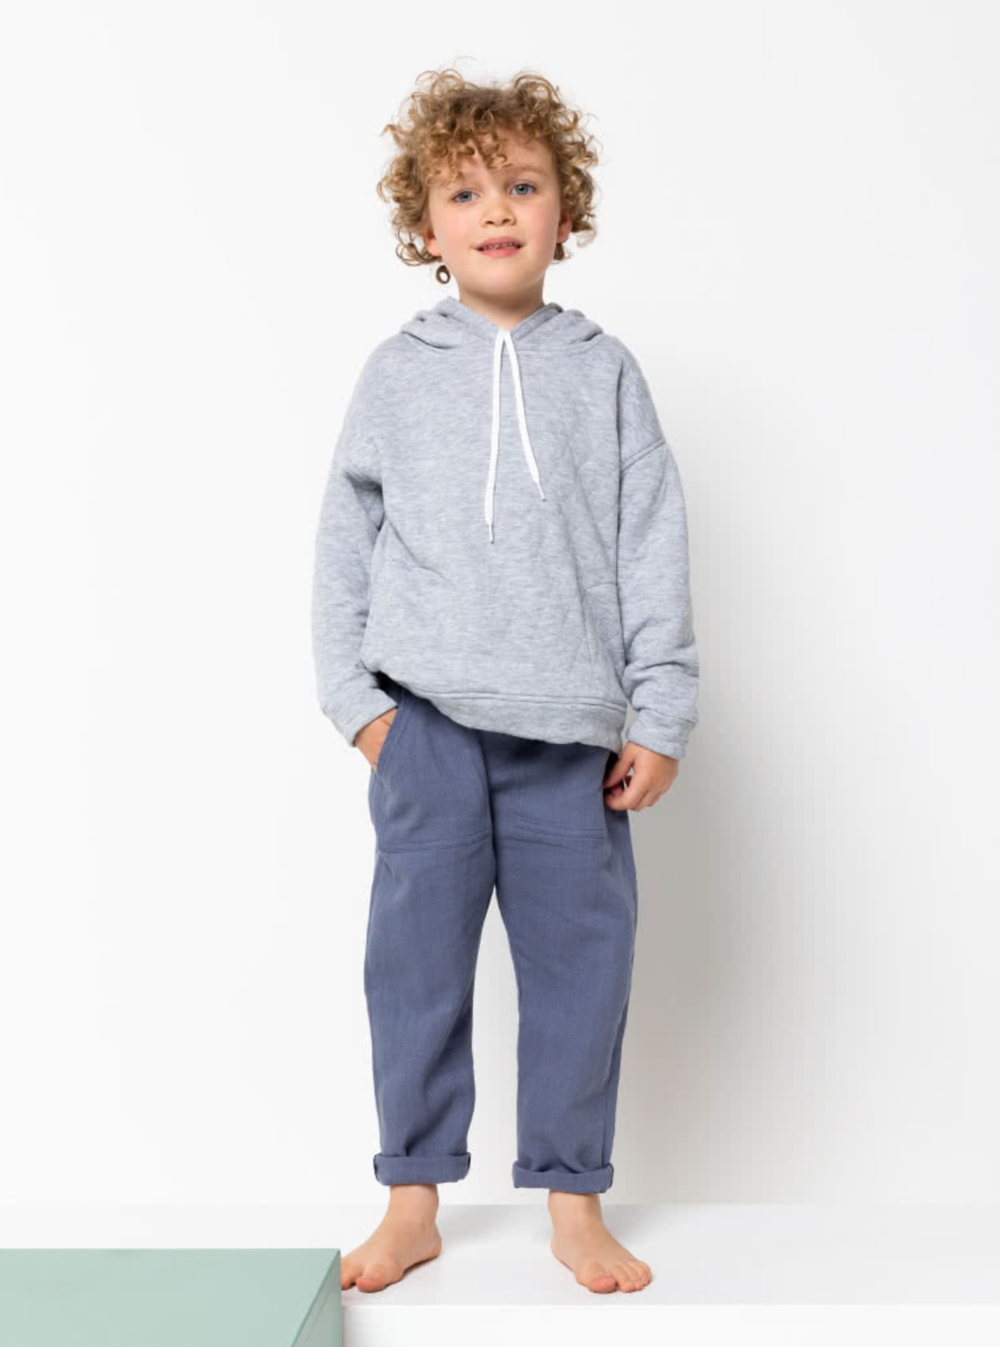 Child wearing the Baby/Child Fitzroy Hoodie sewing pattern from Style Arc on The Fold Line. A hoodie pattern made in ponte, sweater knit or fleece fabrics, featuring dropped shoulders, panelled back, in-seam pockets, hood with drawstring, hem and cuff ban